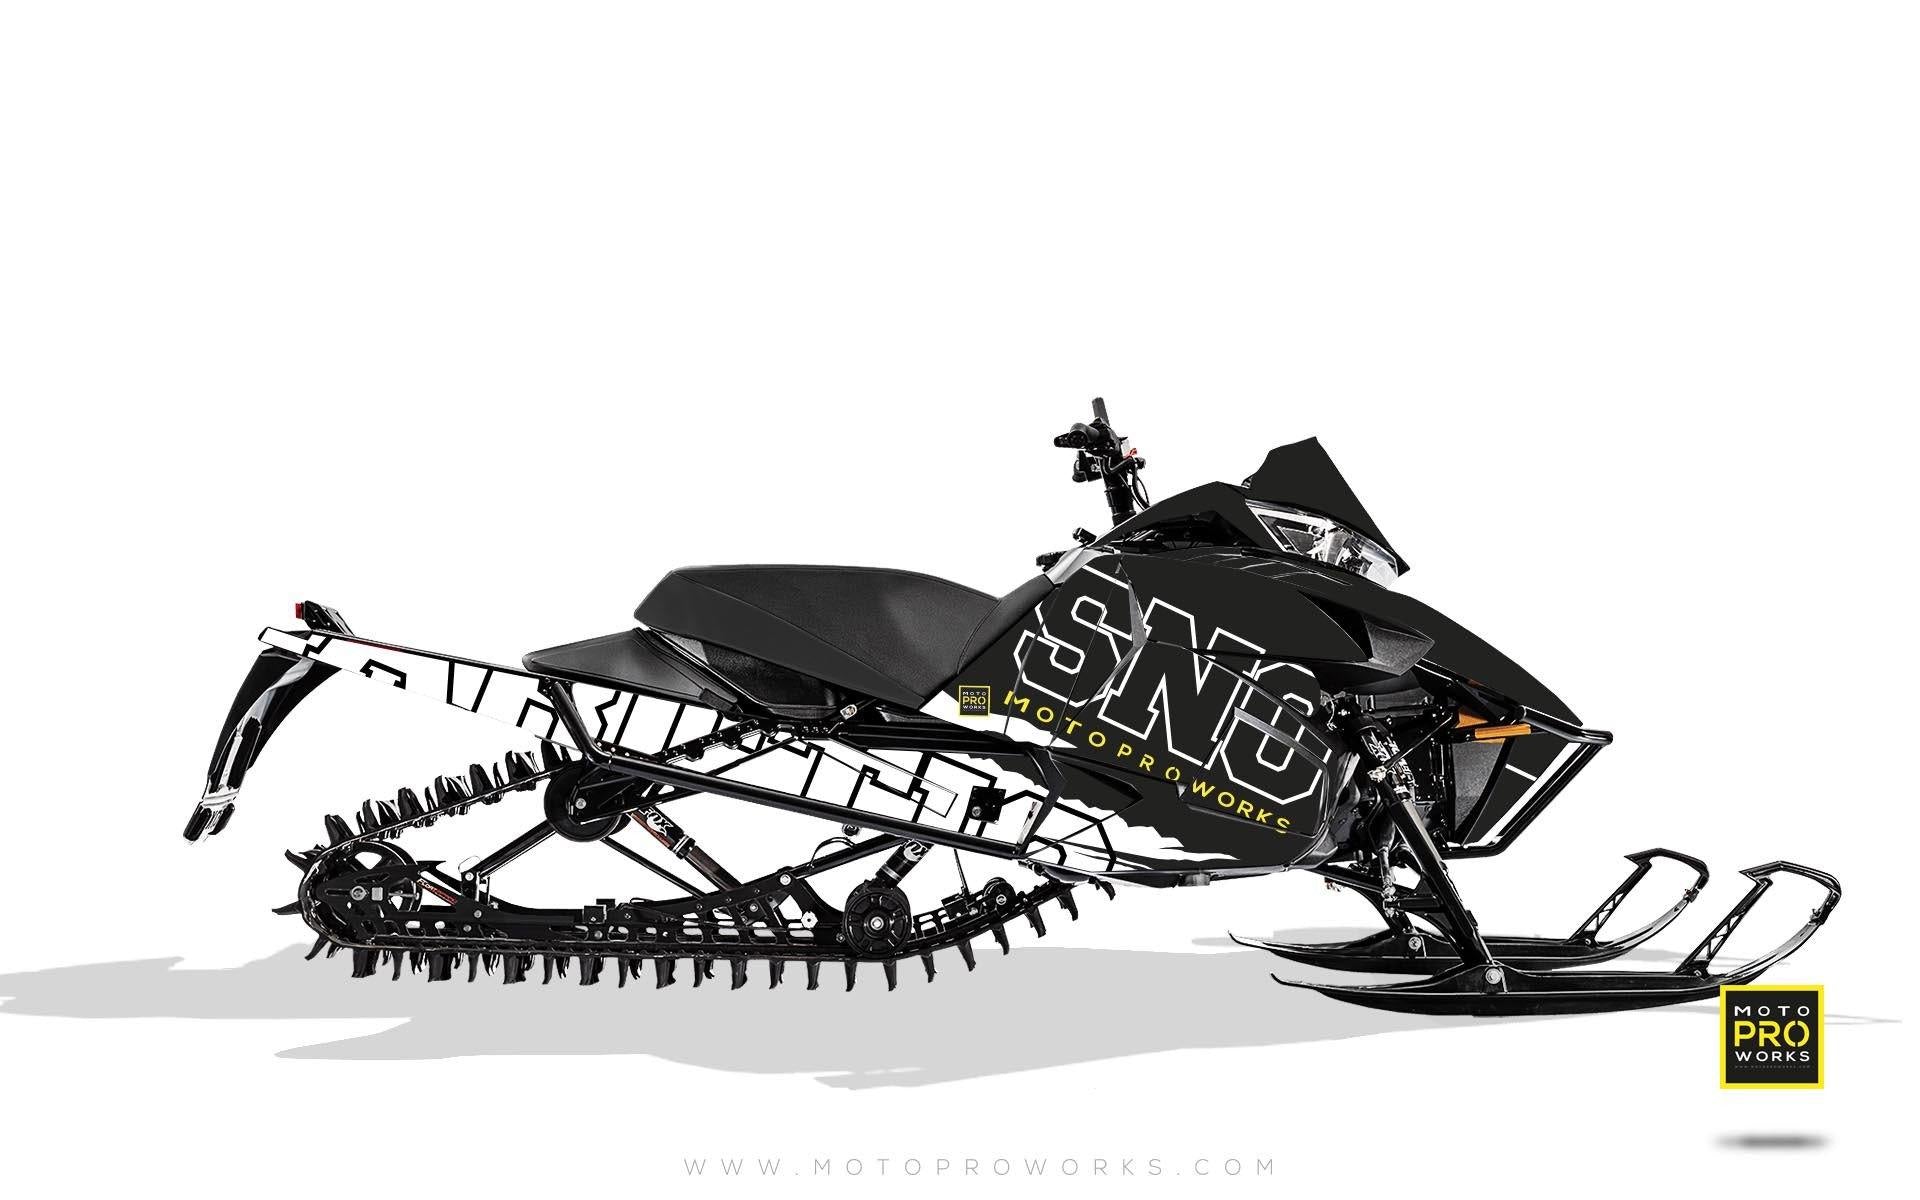 Arctic Cat Graphics - "Scratchy" (b/w) - MotoProWorks | Decals and Bike Graphic kit